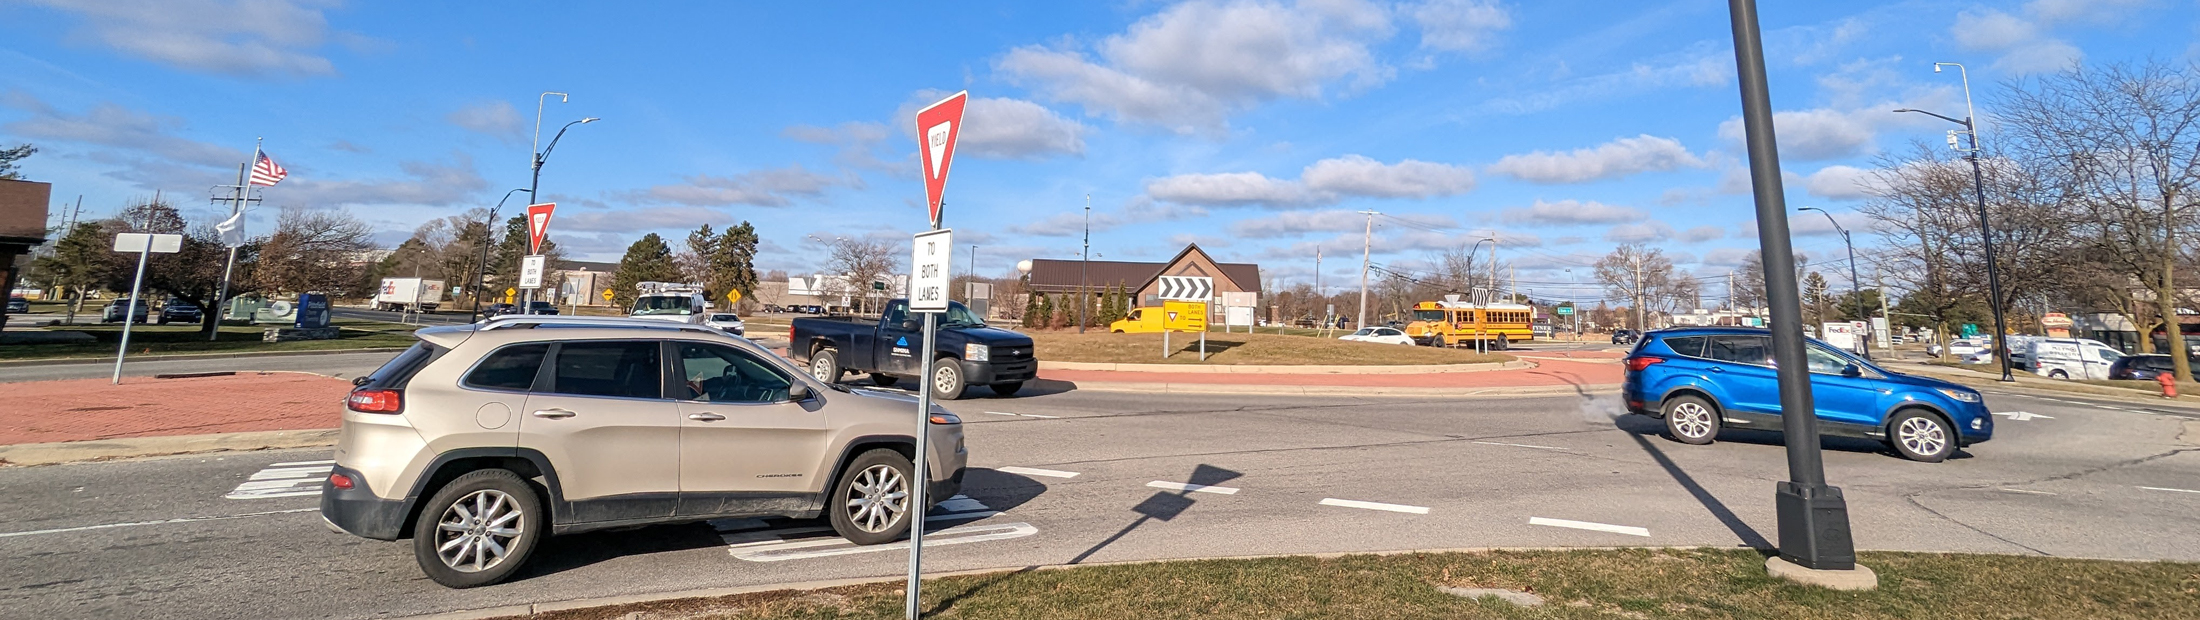 The State Street/Ellsworth Road roundabout